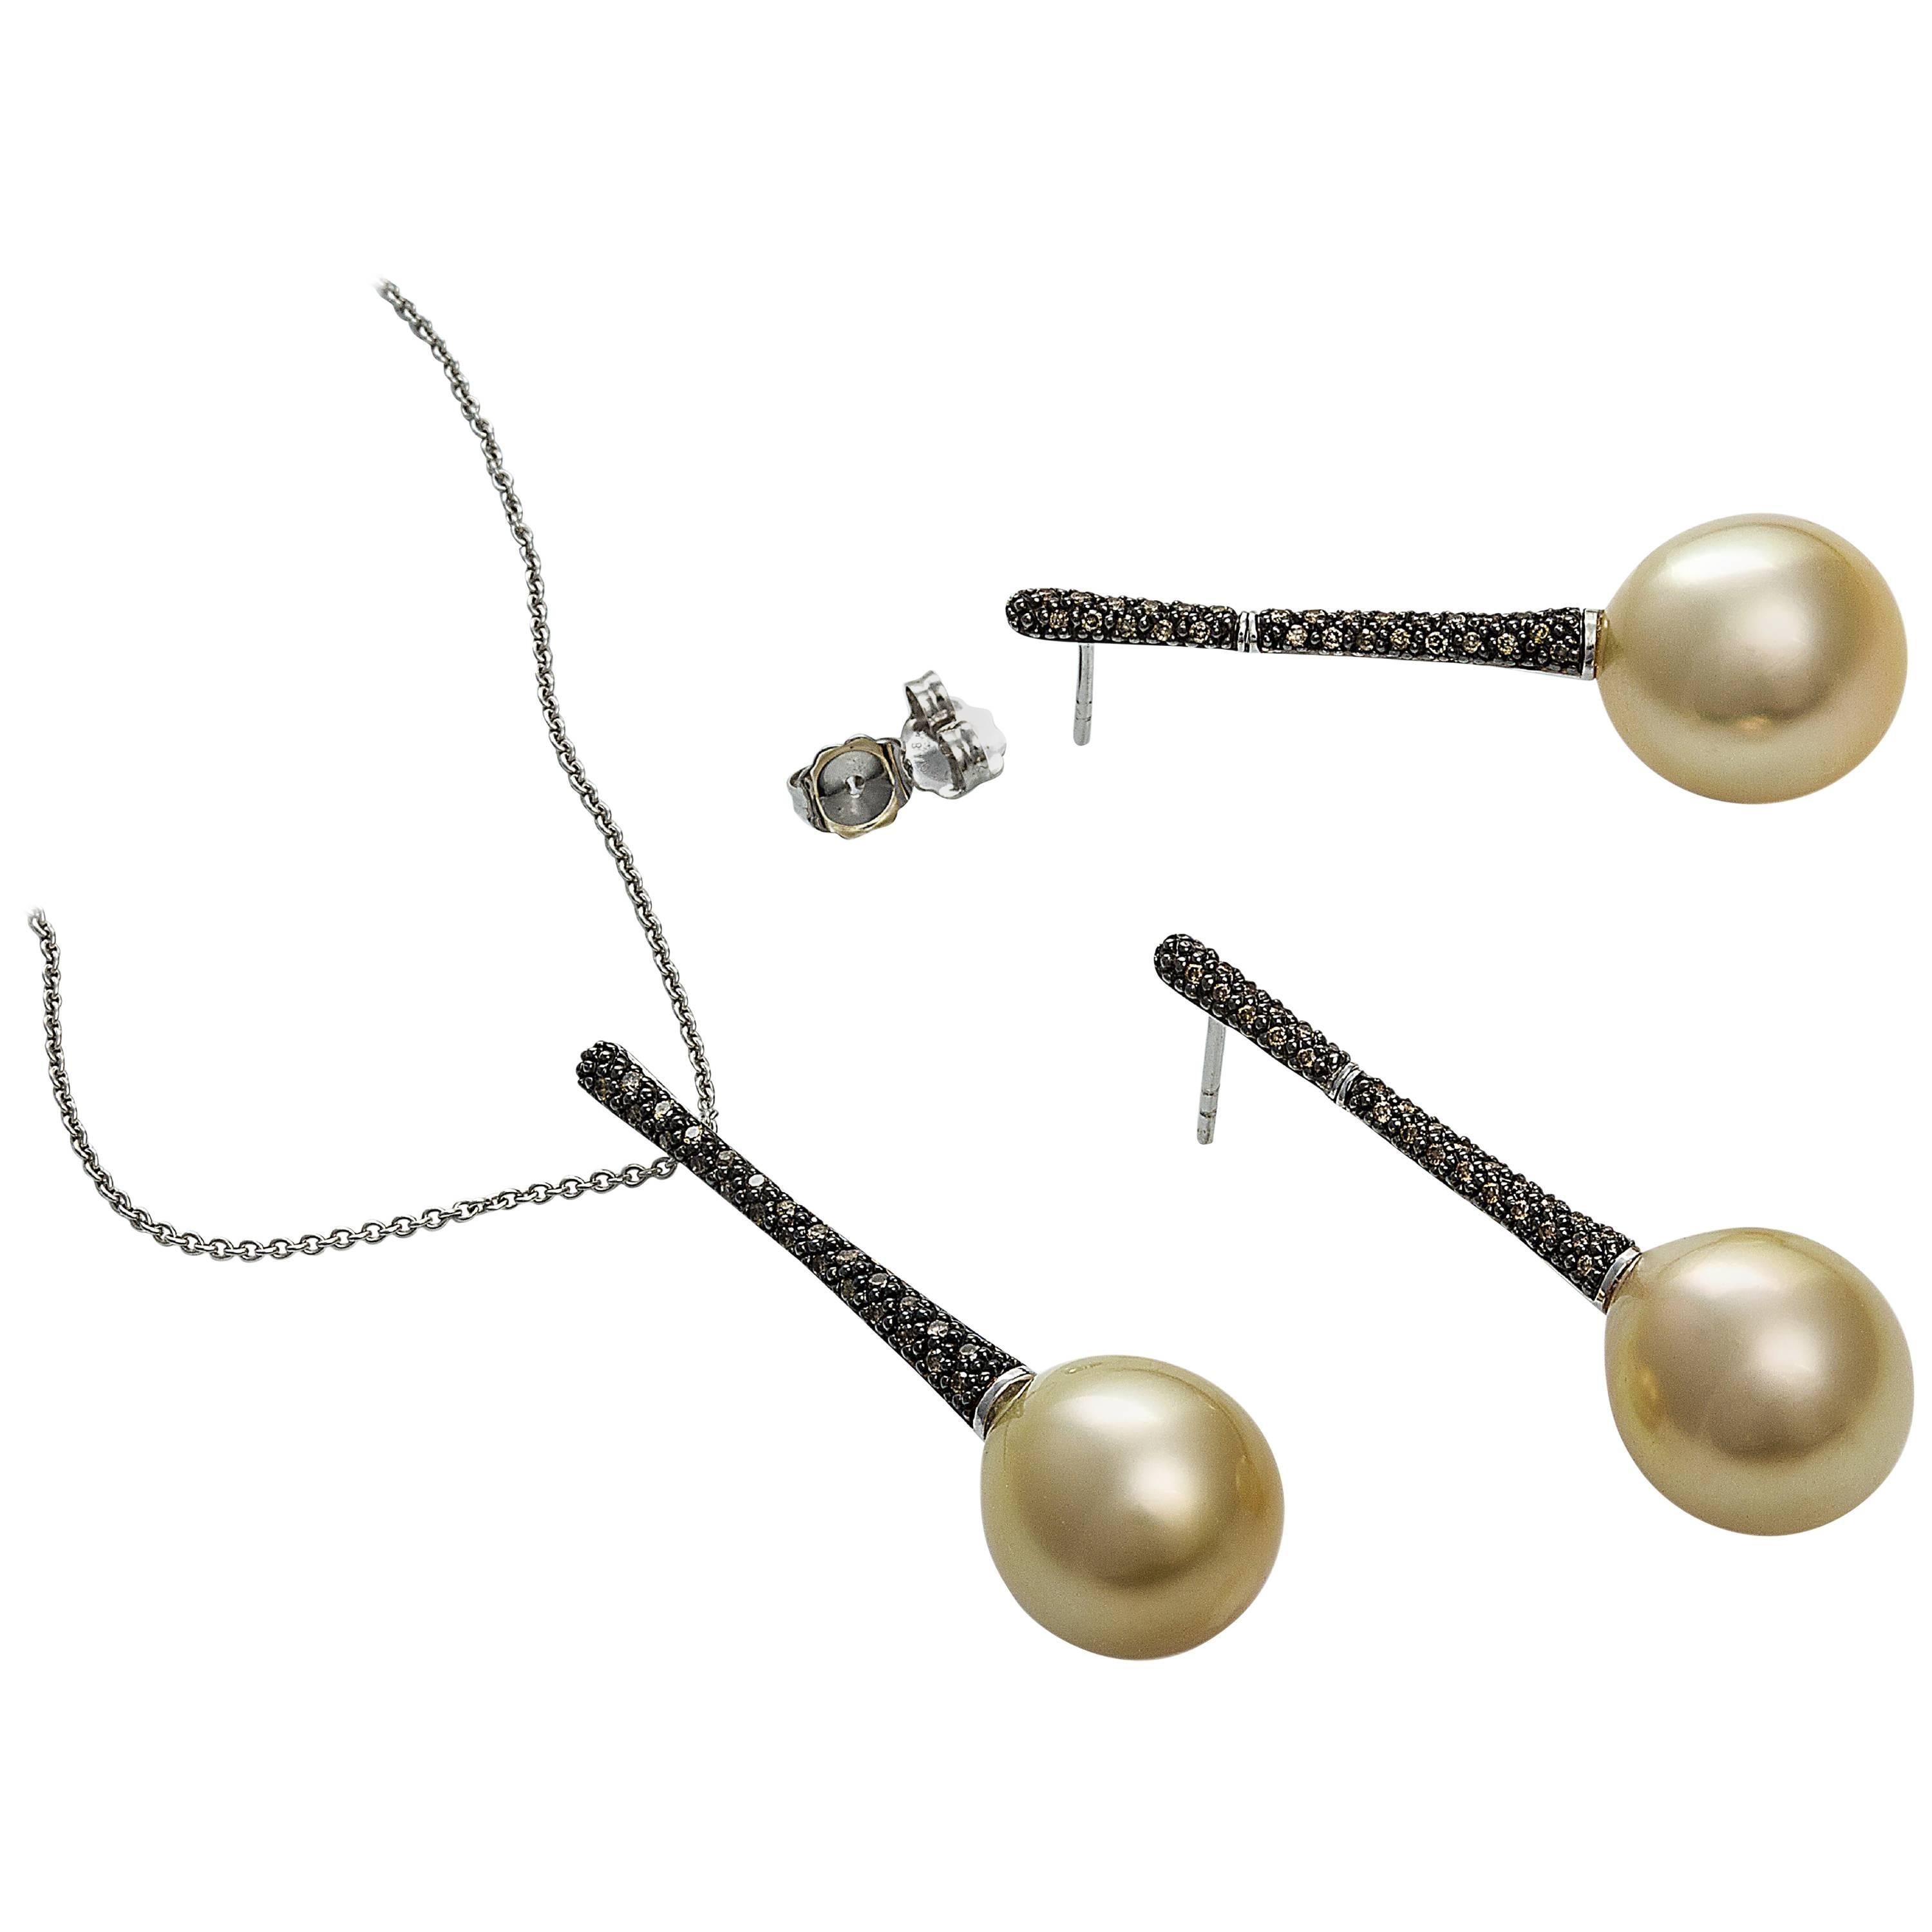 Beautiful collection of long drop diamond and golden South Sea pearl pendant and earrings.

This exclusive set is made of 18 carat white gold with a featured front panel with a black rhodium finish which is set with 0.55 carat cognac diamonds.

The